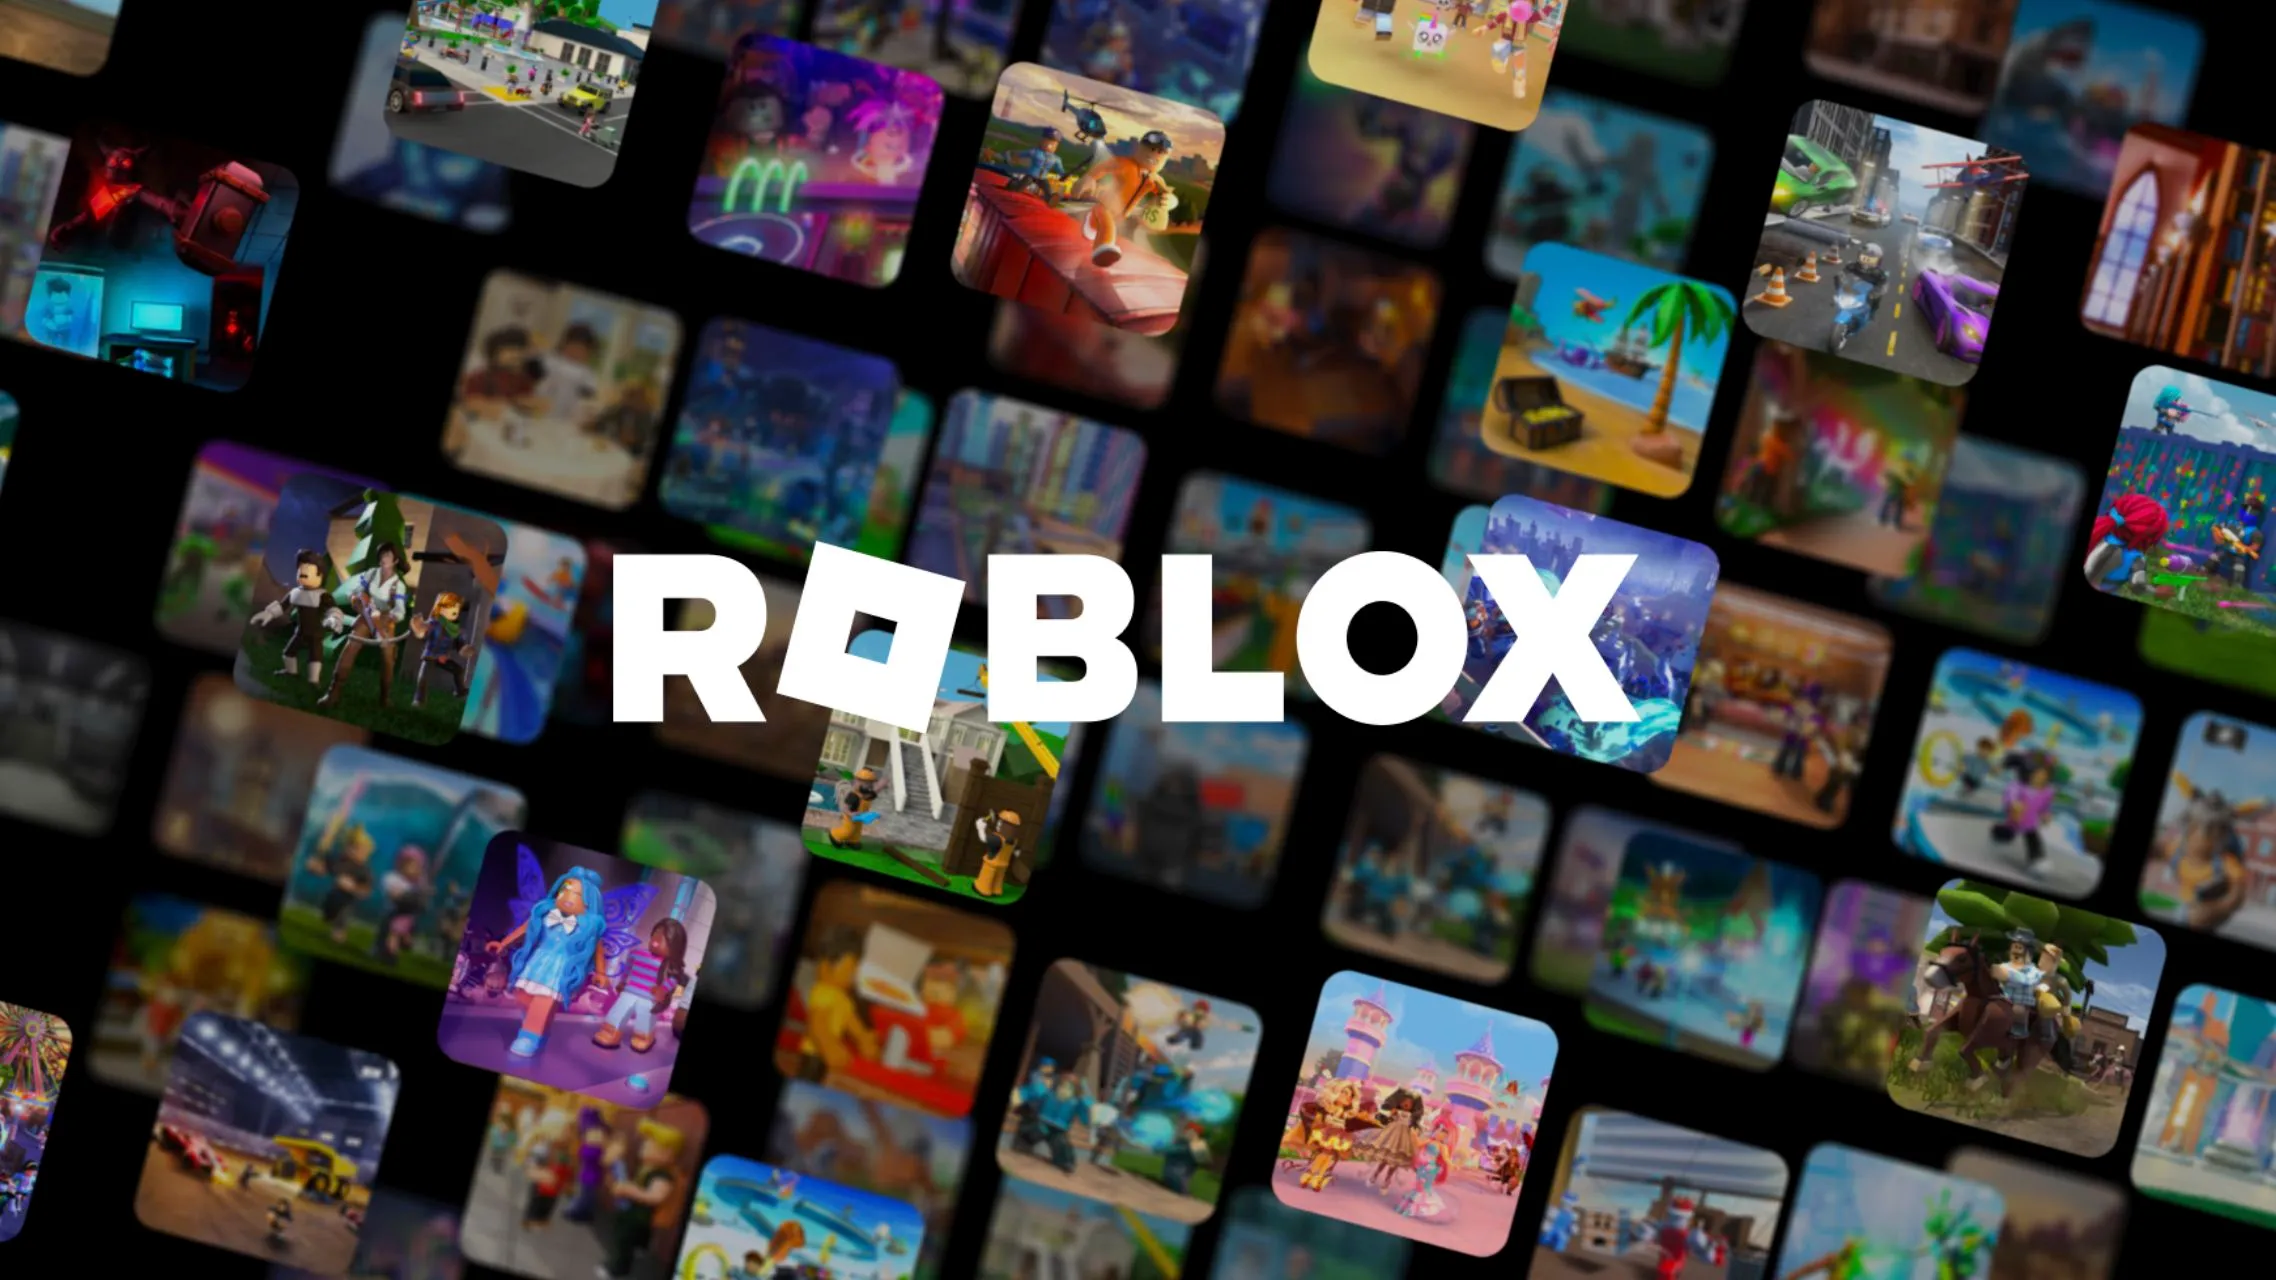 How to Get Free Robux on Roblox?